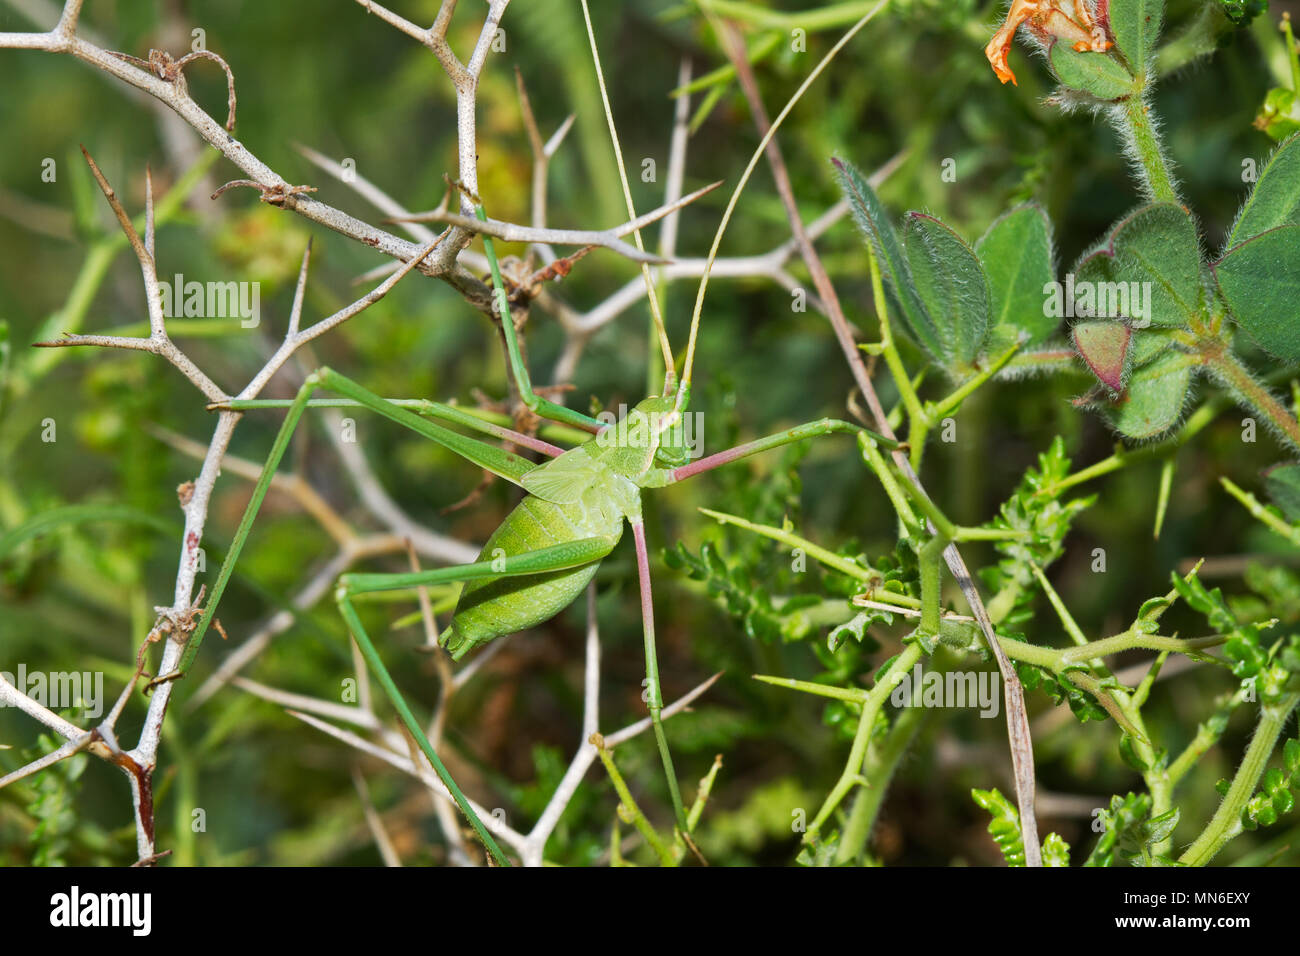 A green Bush cricket with perfect camouflage, almost invisible in the bushes Stock Photo